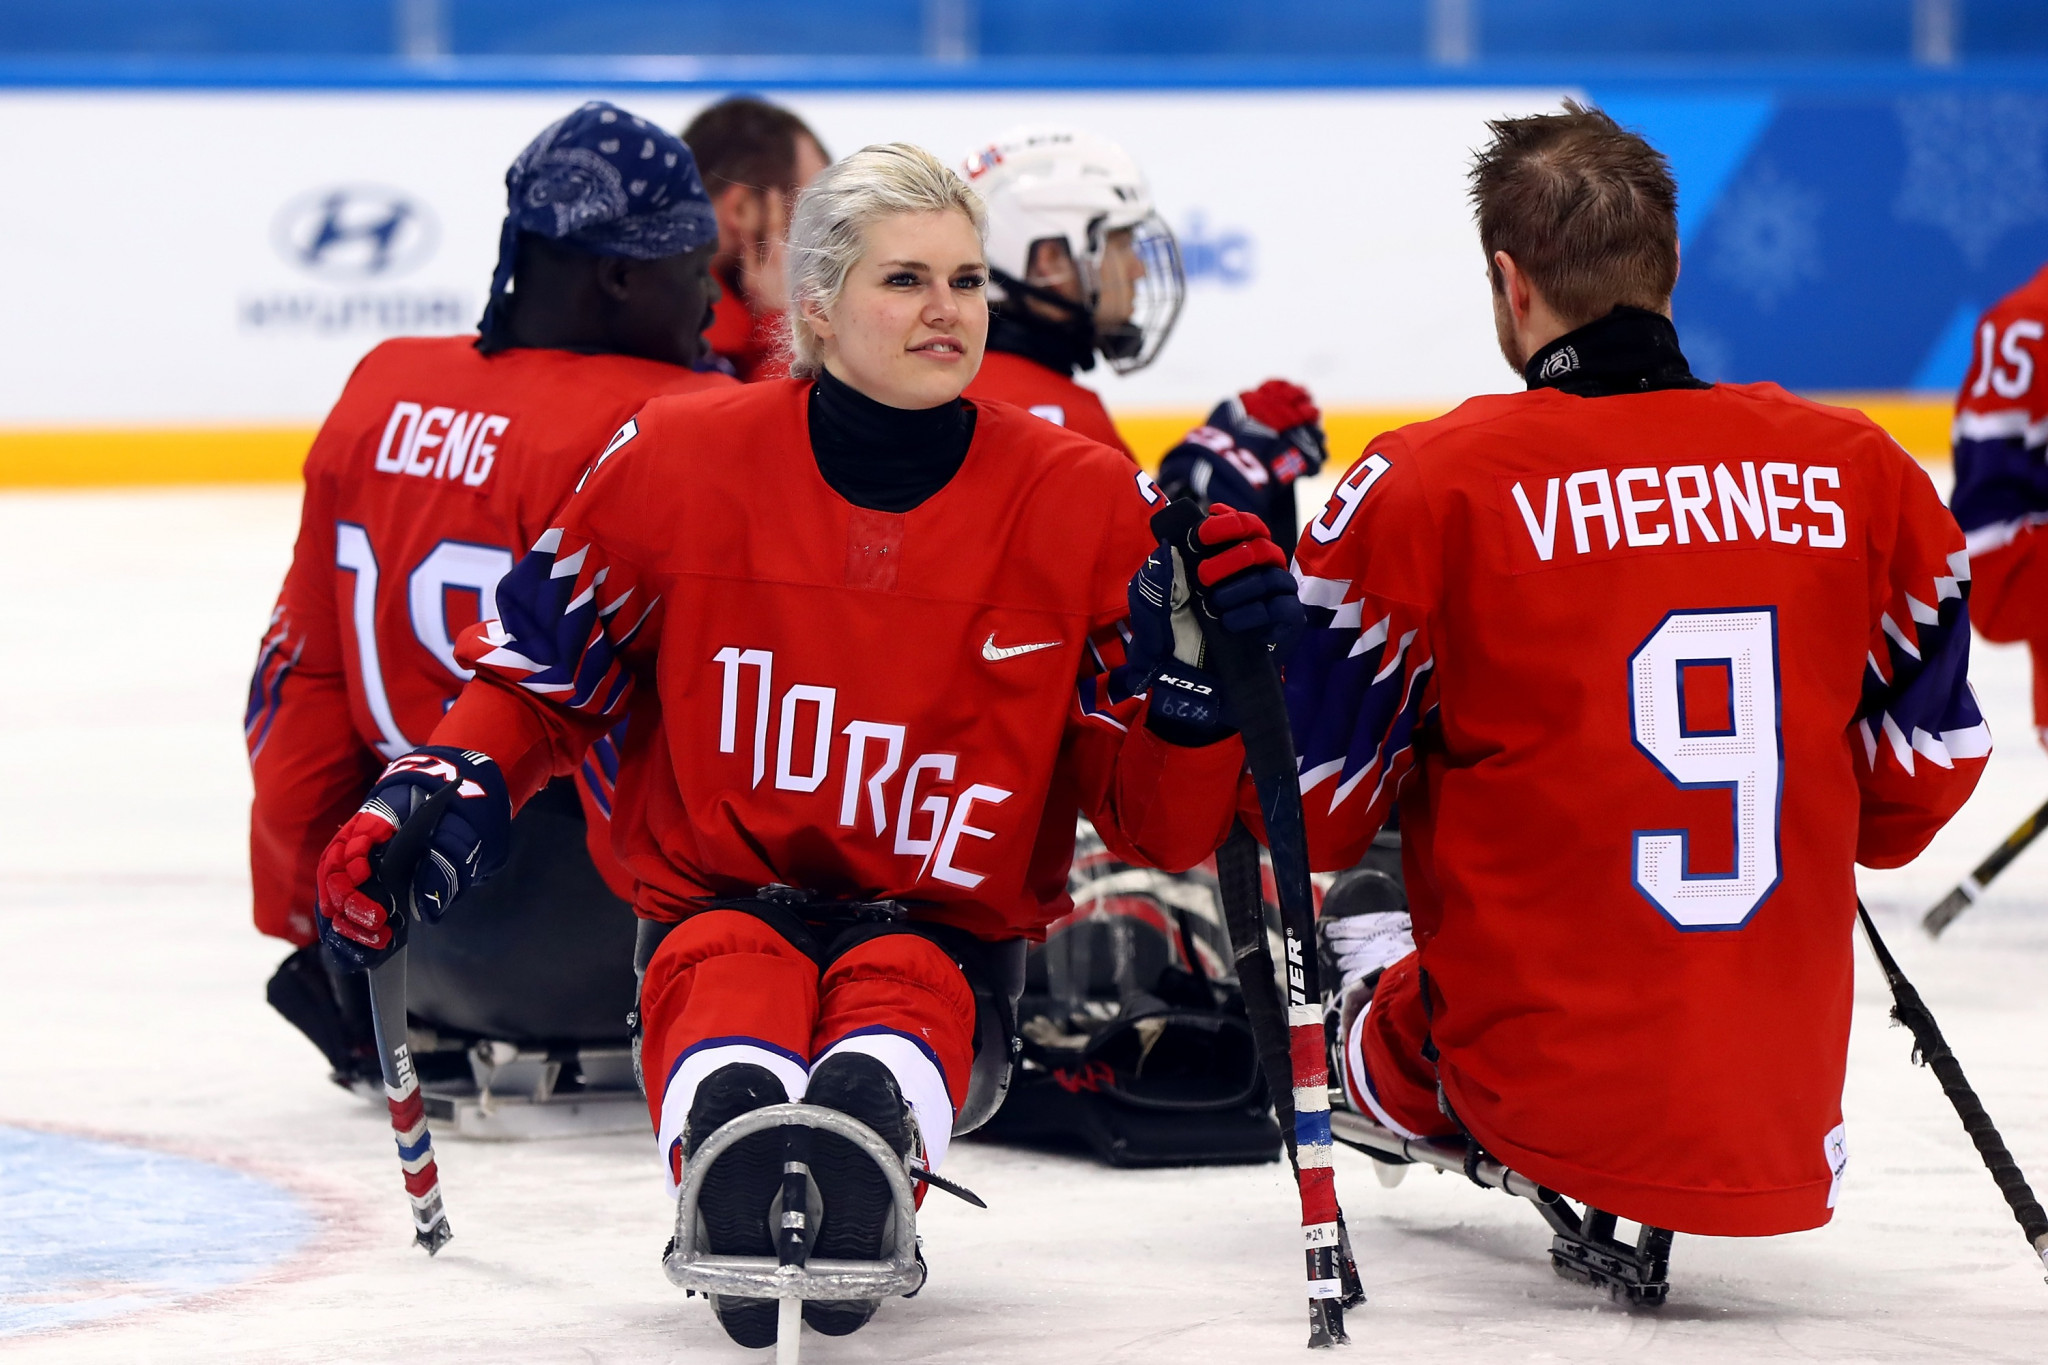 Lena Schroeder, the only women's player competing in the ice hockey tournament, helped Norway to a 3-1 win over Sweden in Group A ©Getty Images